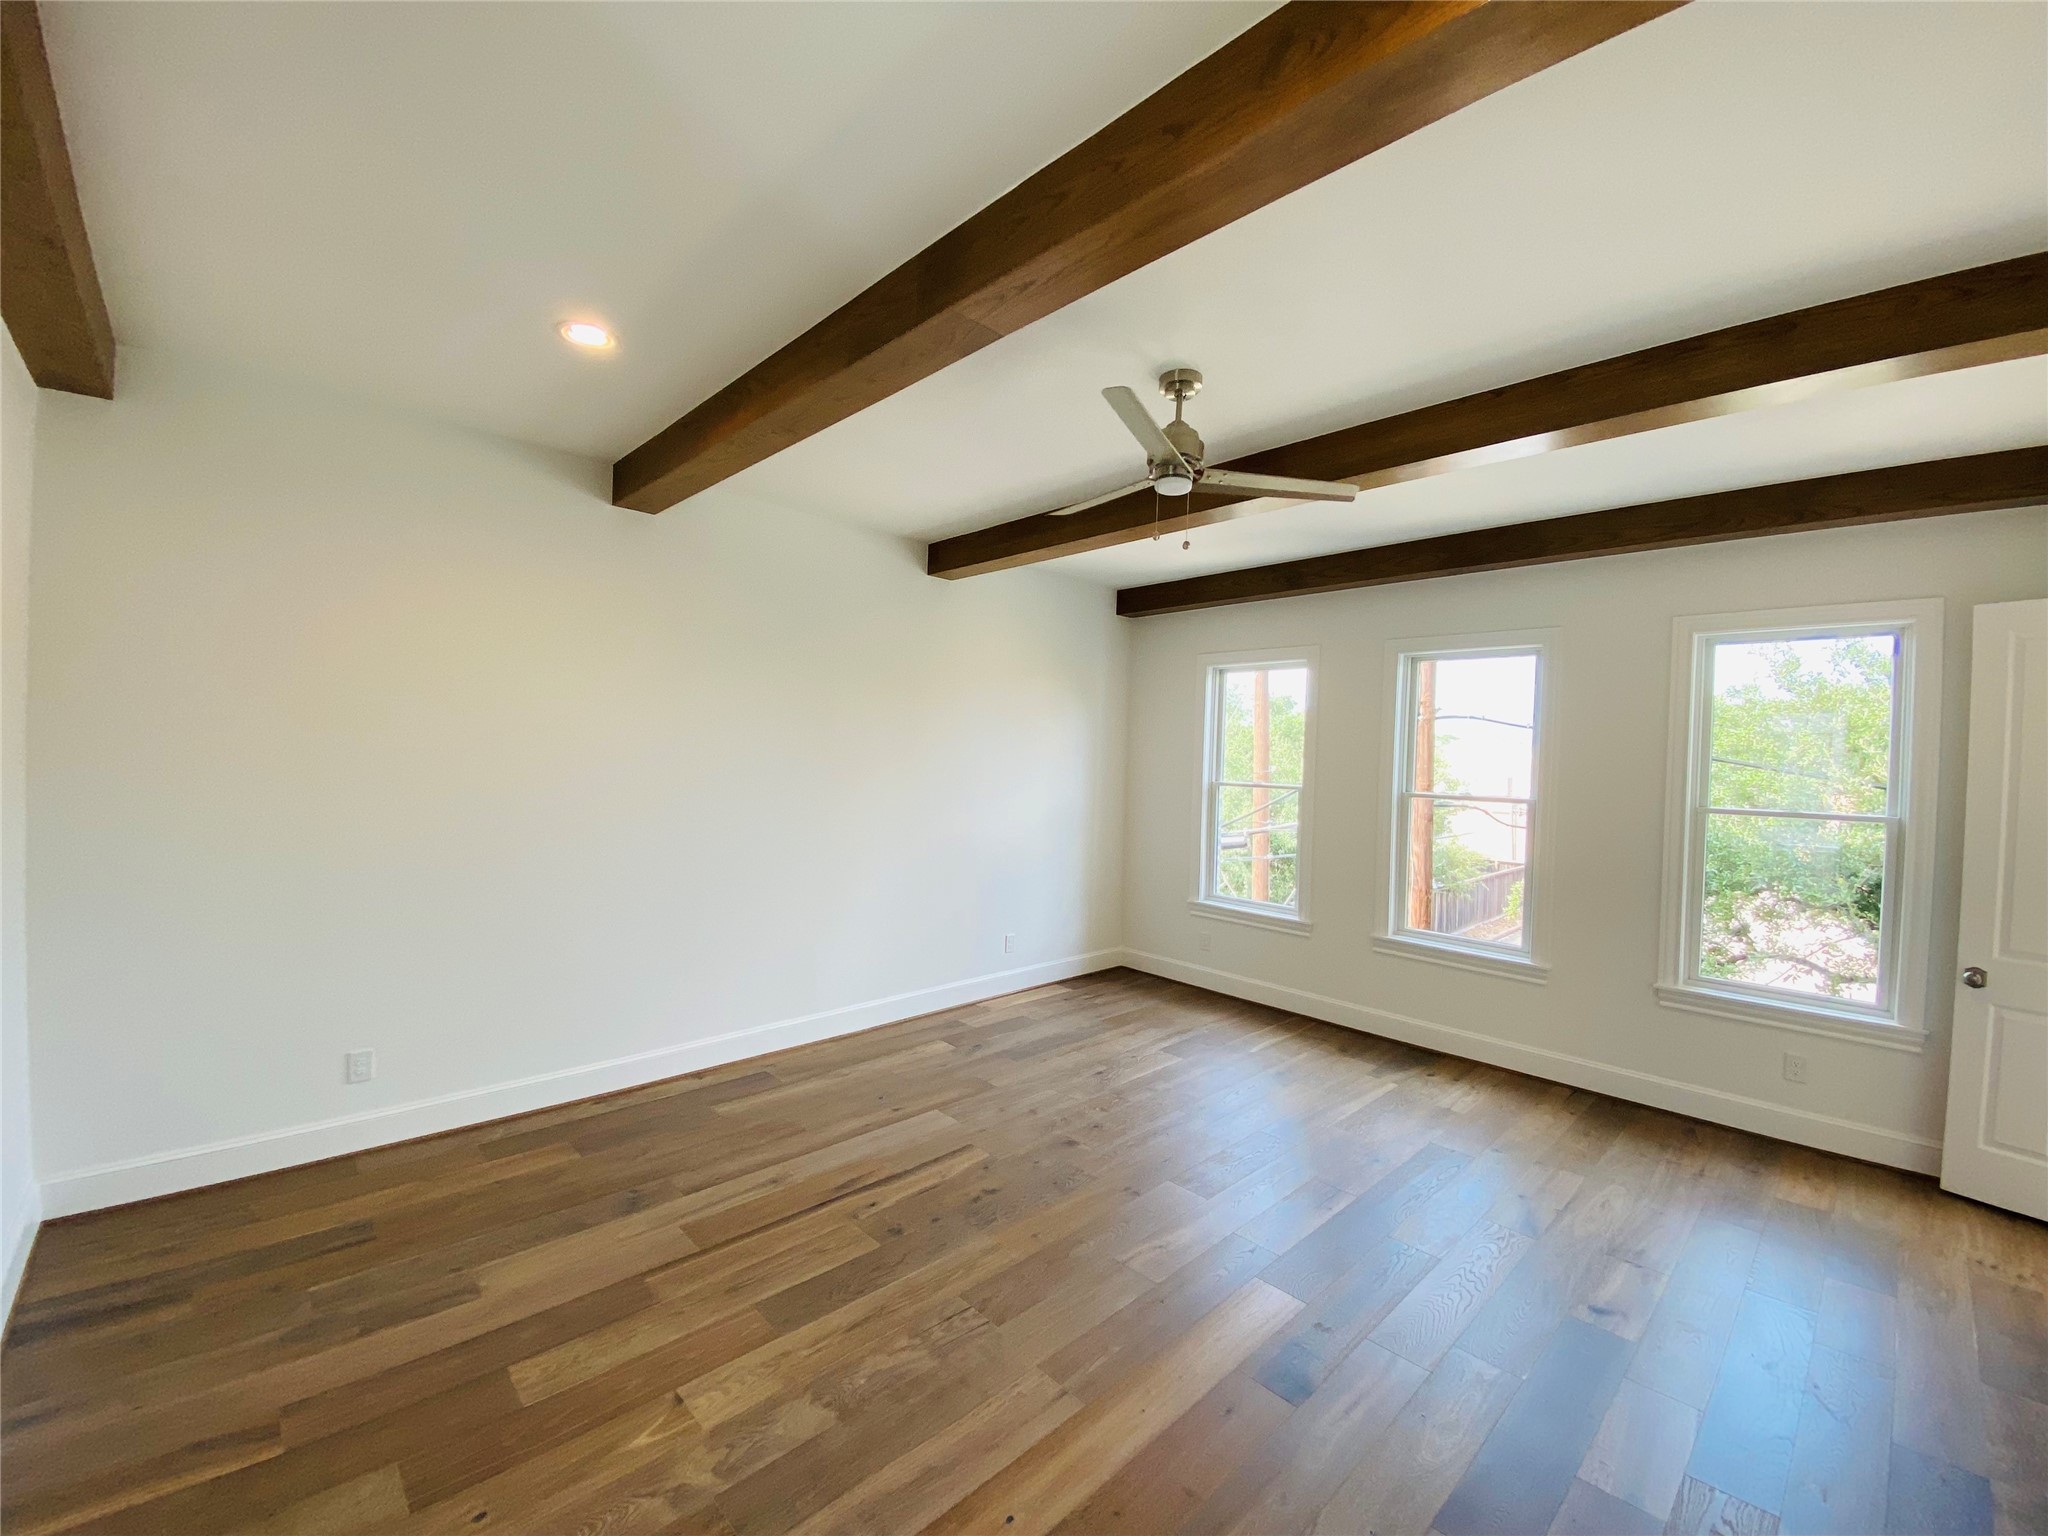 Primary bedroom with beautiful beams and wood floors.